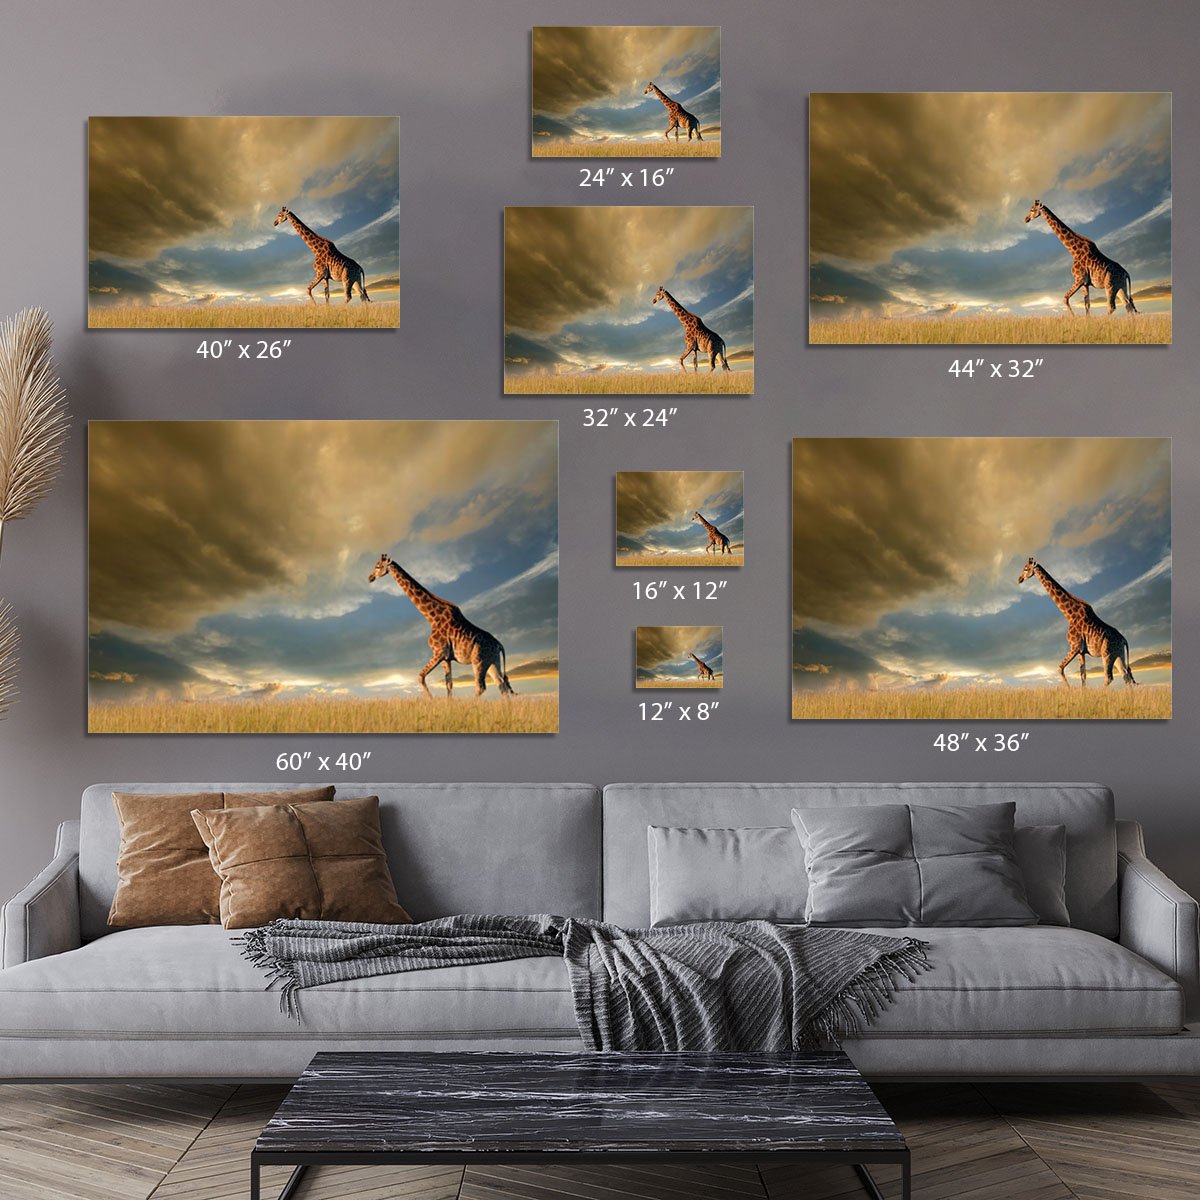 A giraffe walking on the African plains against a dramatic sky Canvas Print or Poster